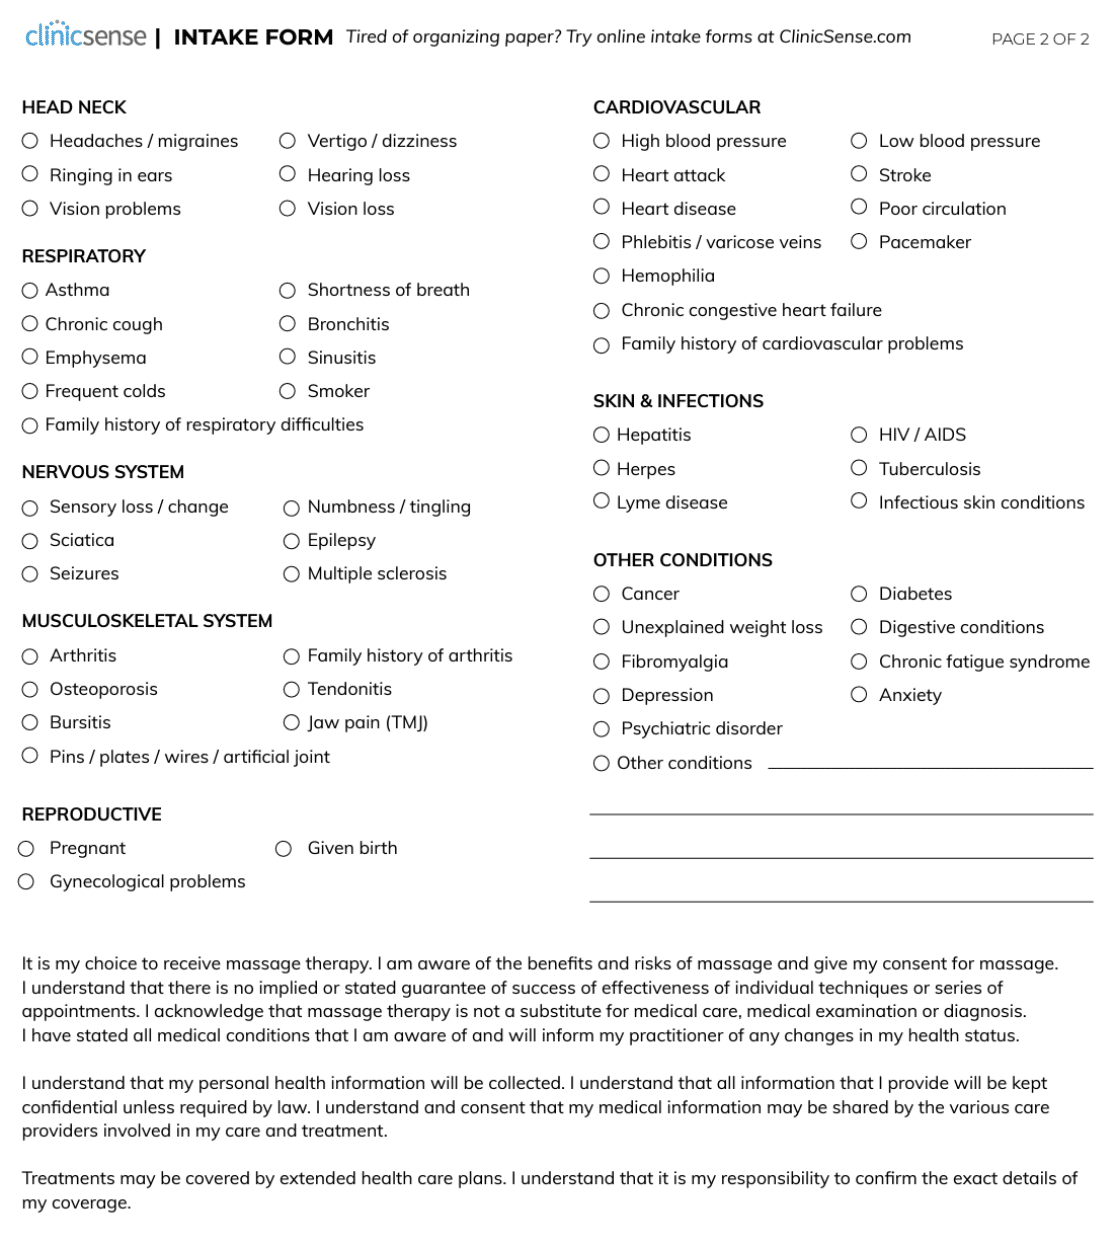 An example of a massage intake form 